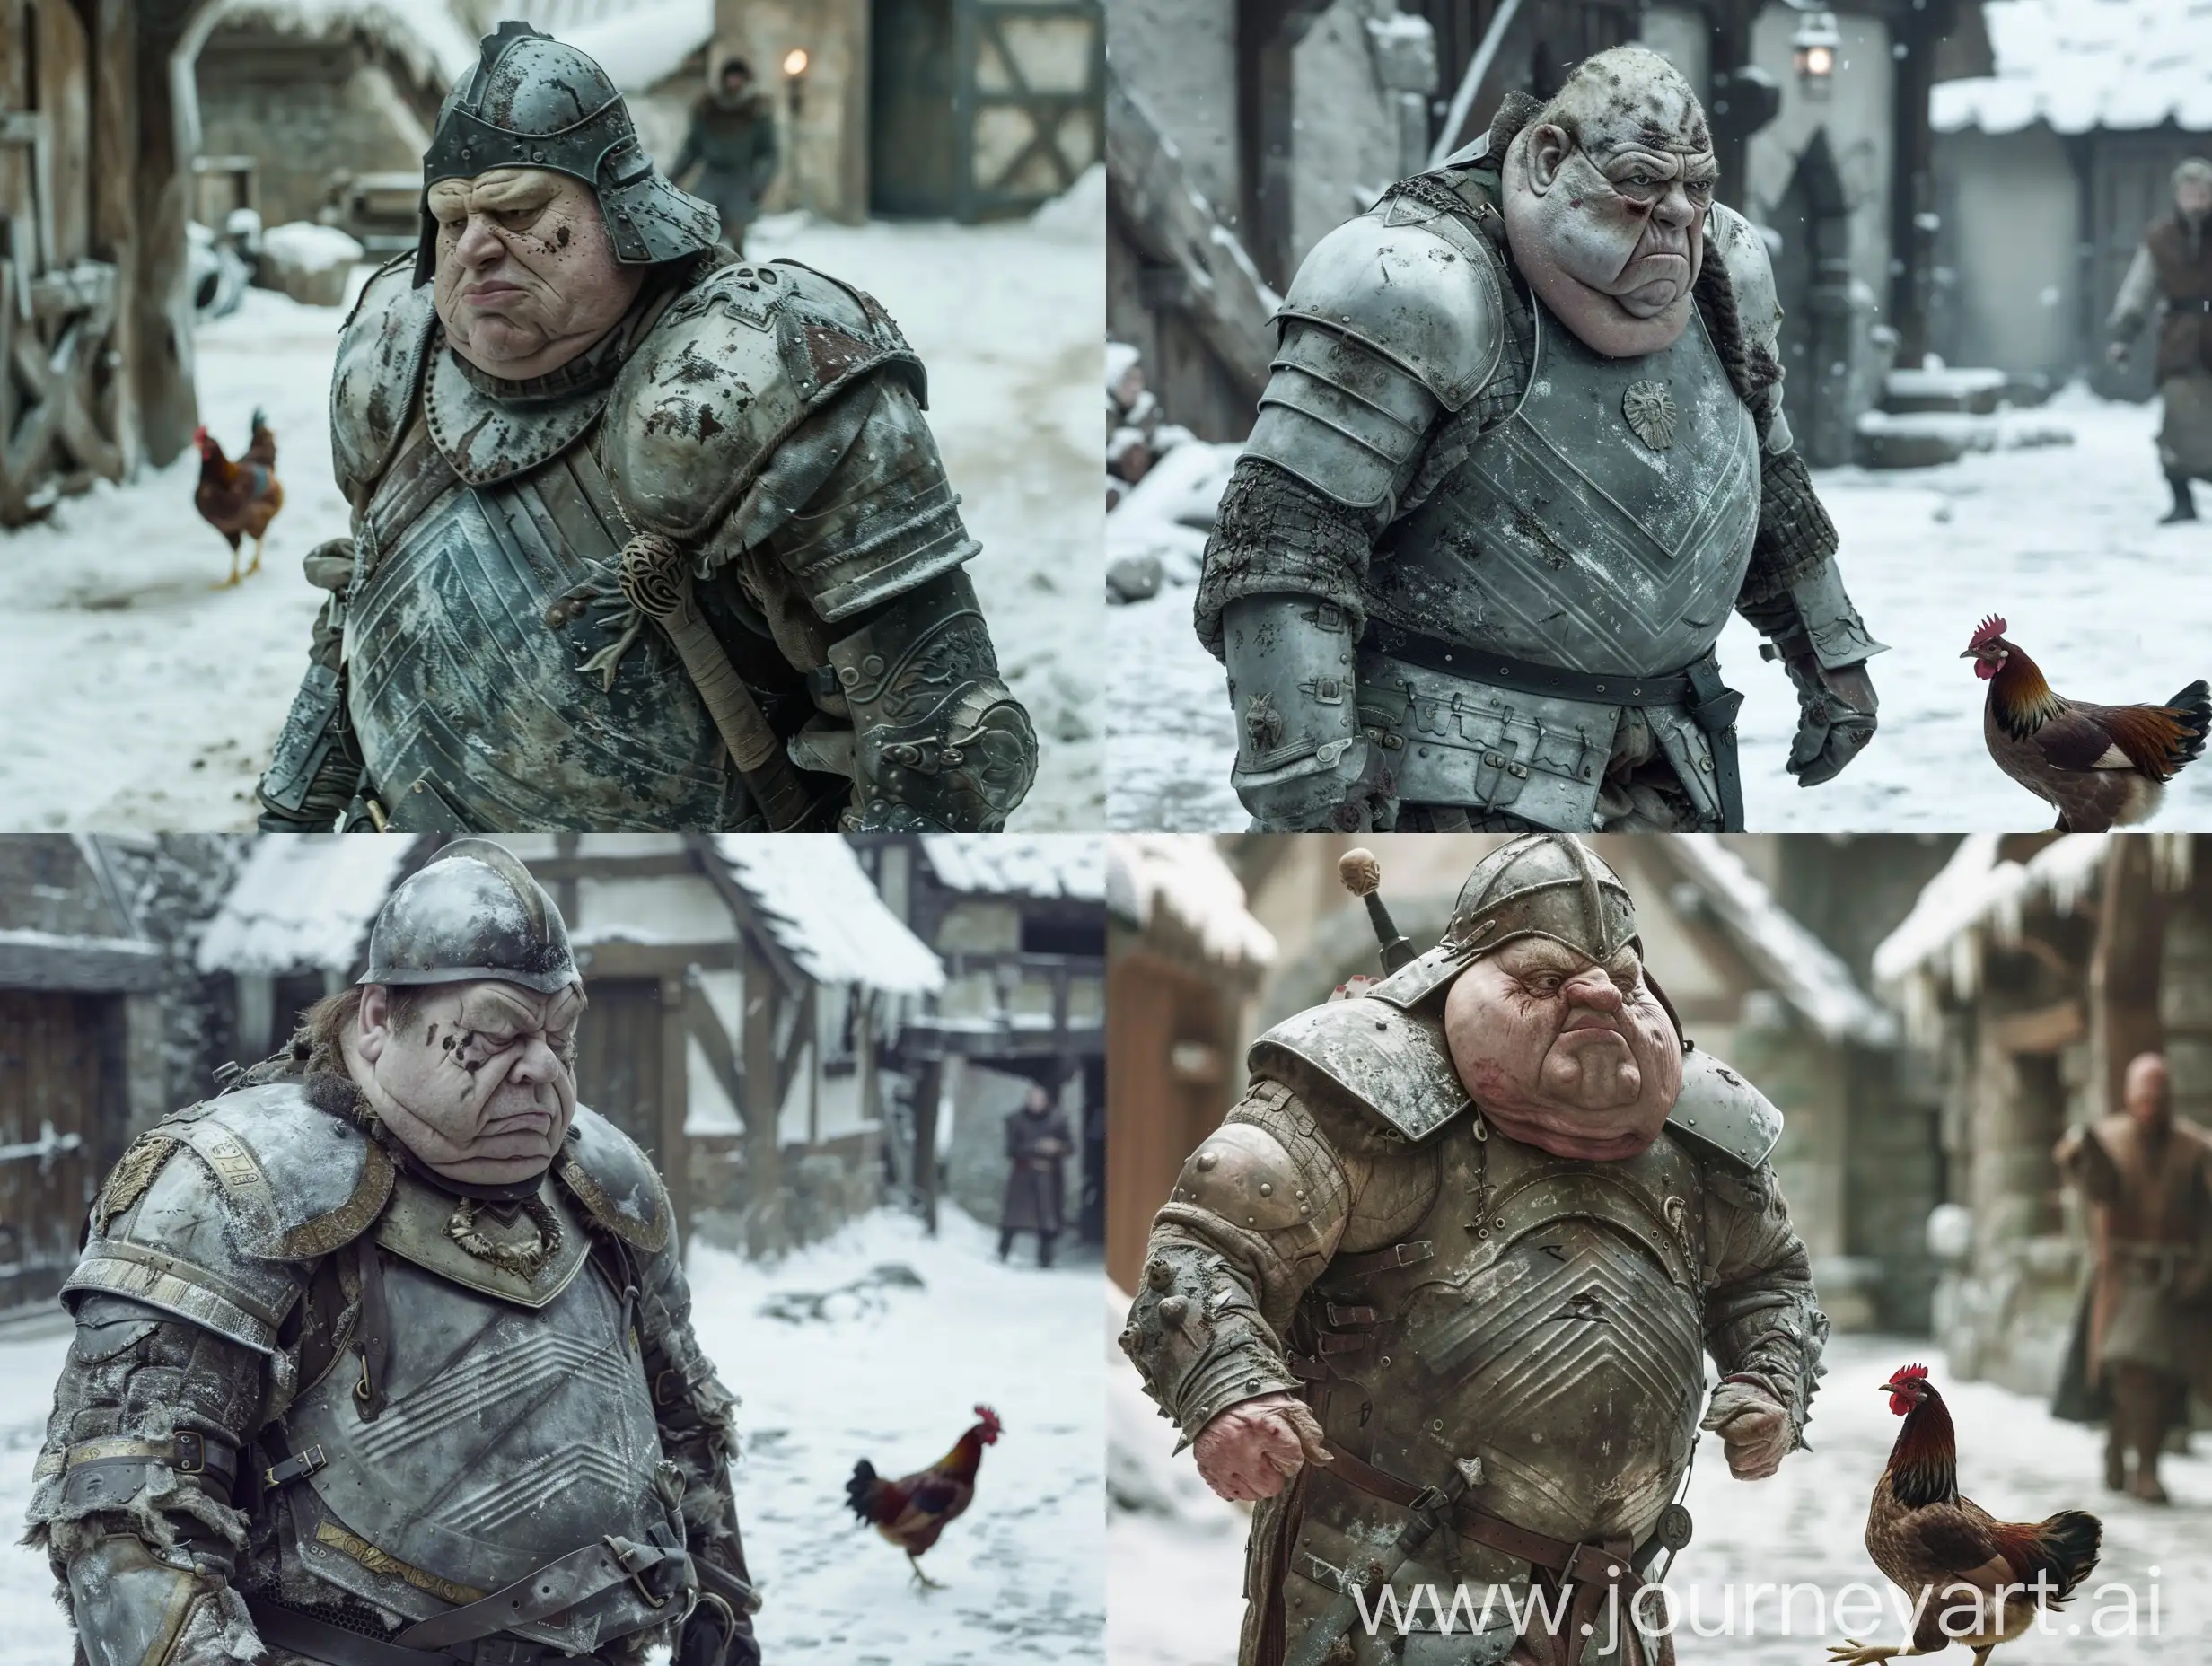 Ramsey Bolton in Game of Thrones series, Ramsey Bolton is very fat and has a very fat face and body, Ramsey Bolton is wearing his military armor and helmet as a soldier of Winterfell, Ramsey Bolton is in the snow-covered courtyard of Winterfell, Ramsey Bolton is looking for a chicken is, the chicken runs away from ramsey bolton, the camera follows fat ramsey bolton from the side, the camera catches him walking, witcher style, classic lighting, q2